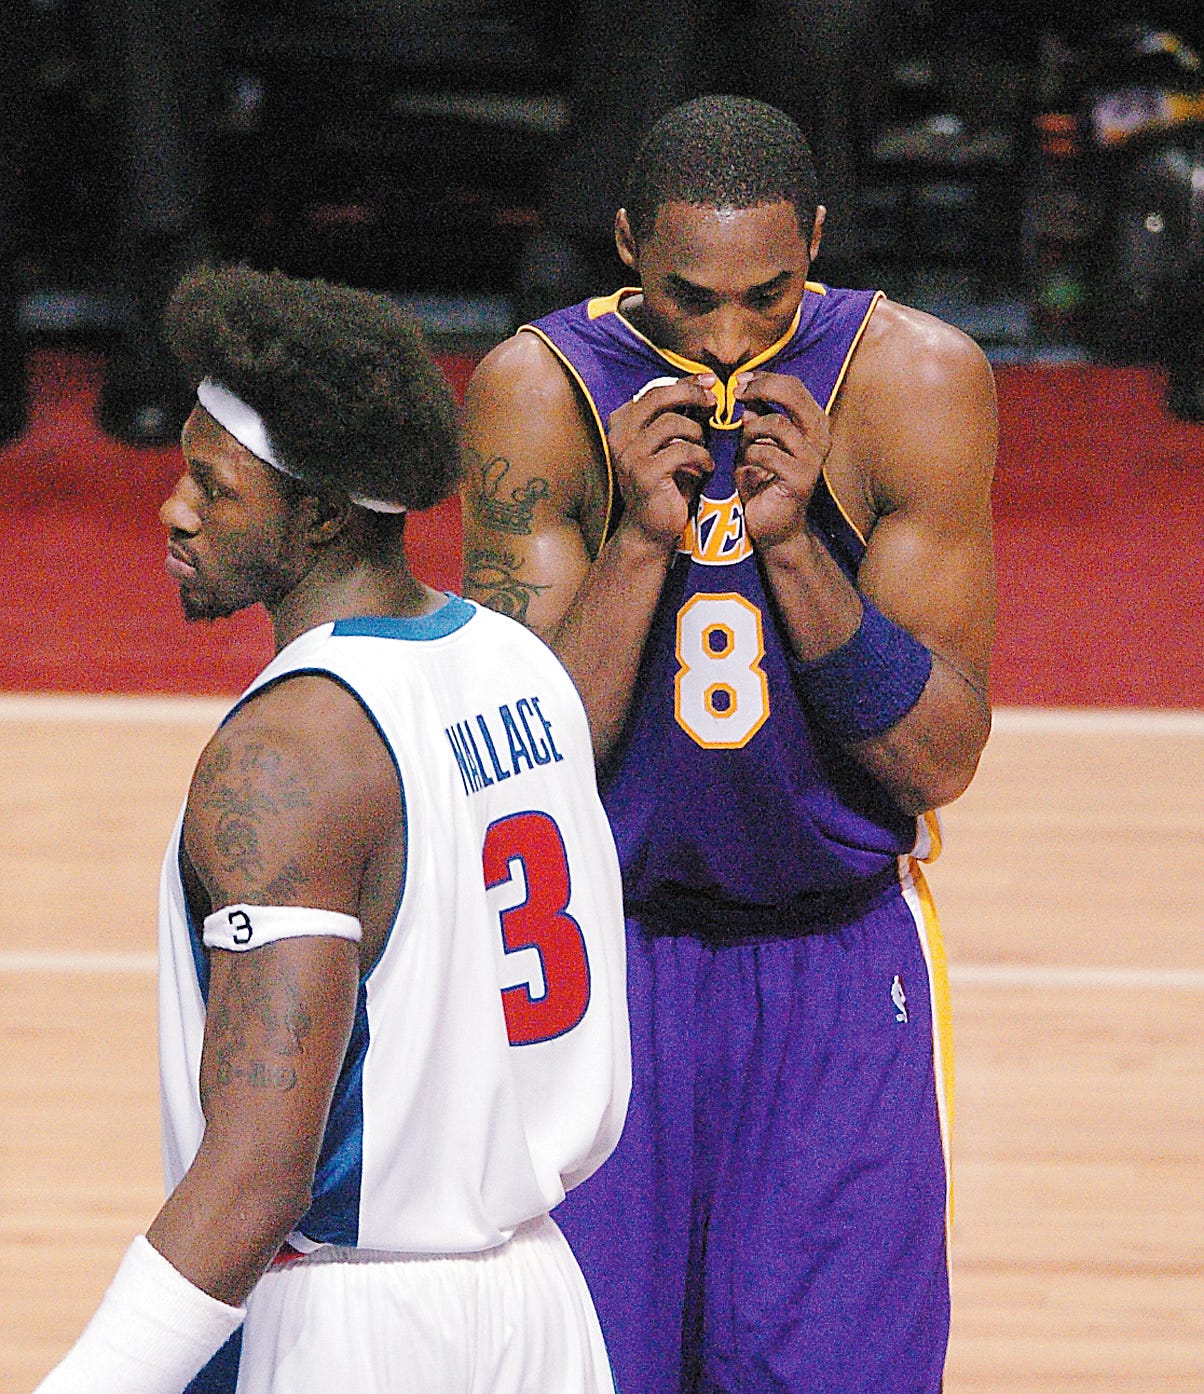 Ben Wallance and Kobe Bryant near the end of Game 4 of the 2004 NBA Finals.